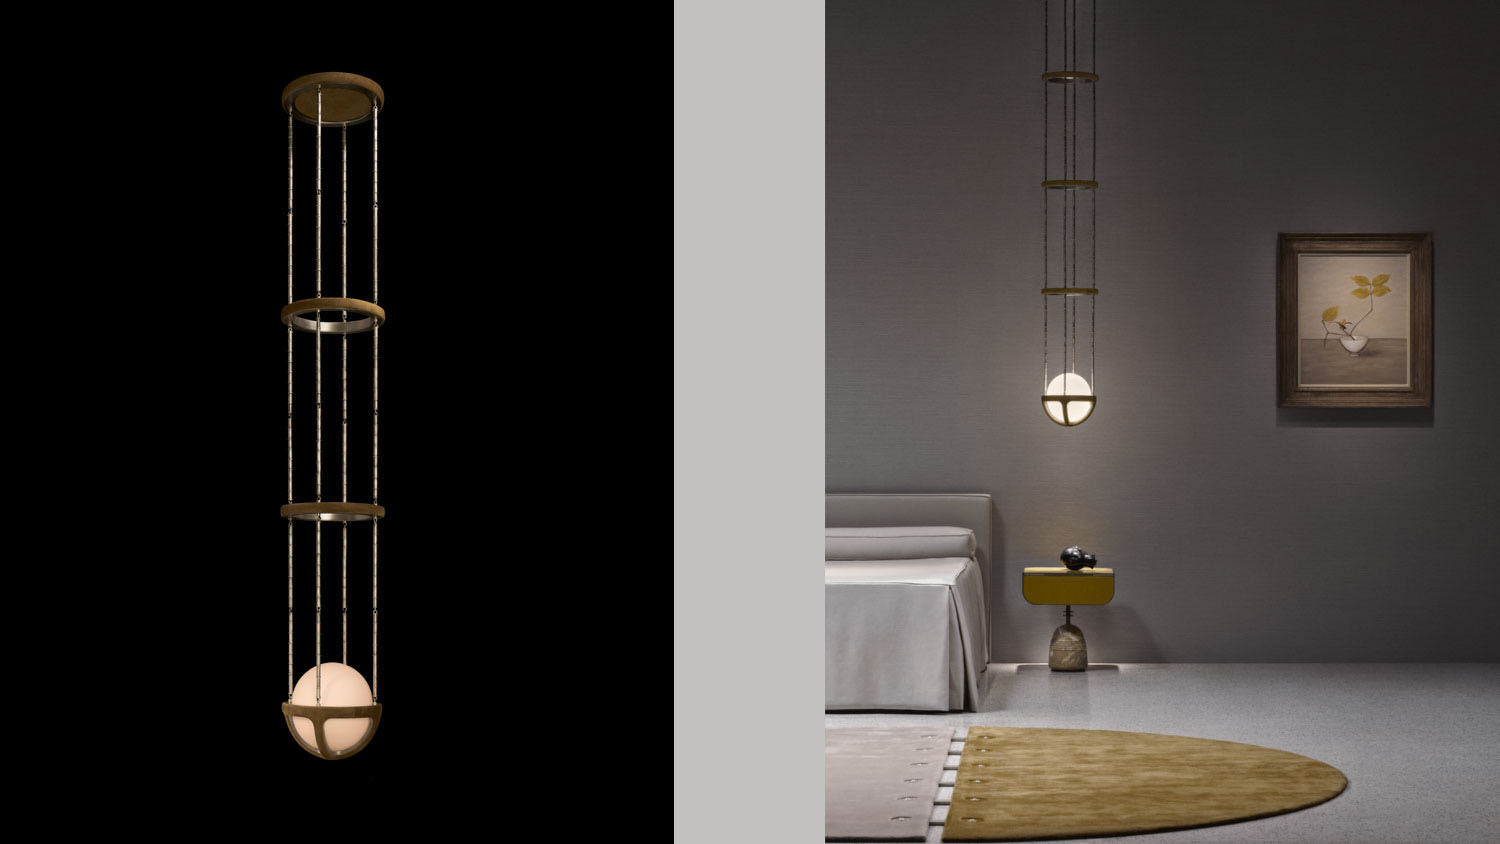 REPRISE ceiling pendant in Bronze Suede and Tarnished Silver, alongside another image of a ceiling pendant hanging above an end table in a bedroom.